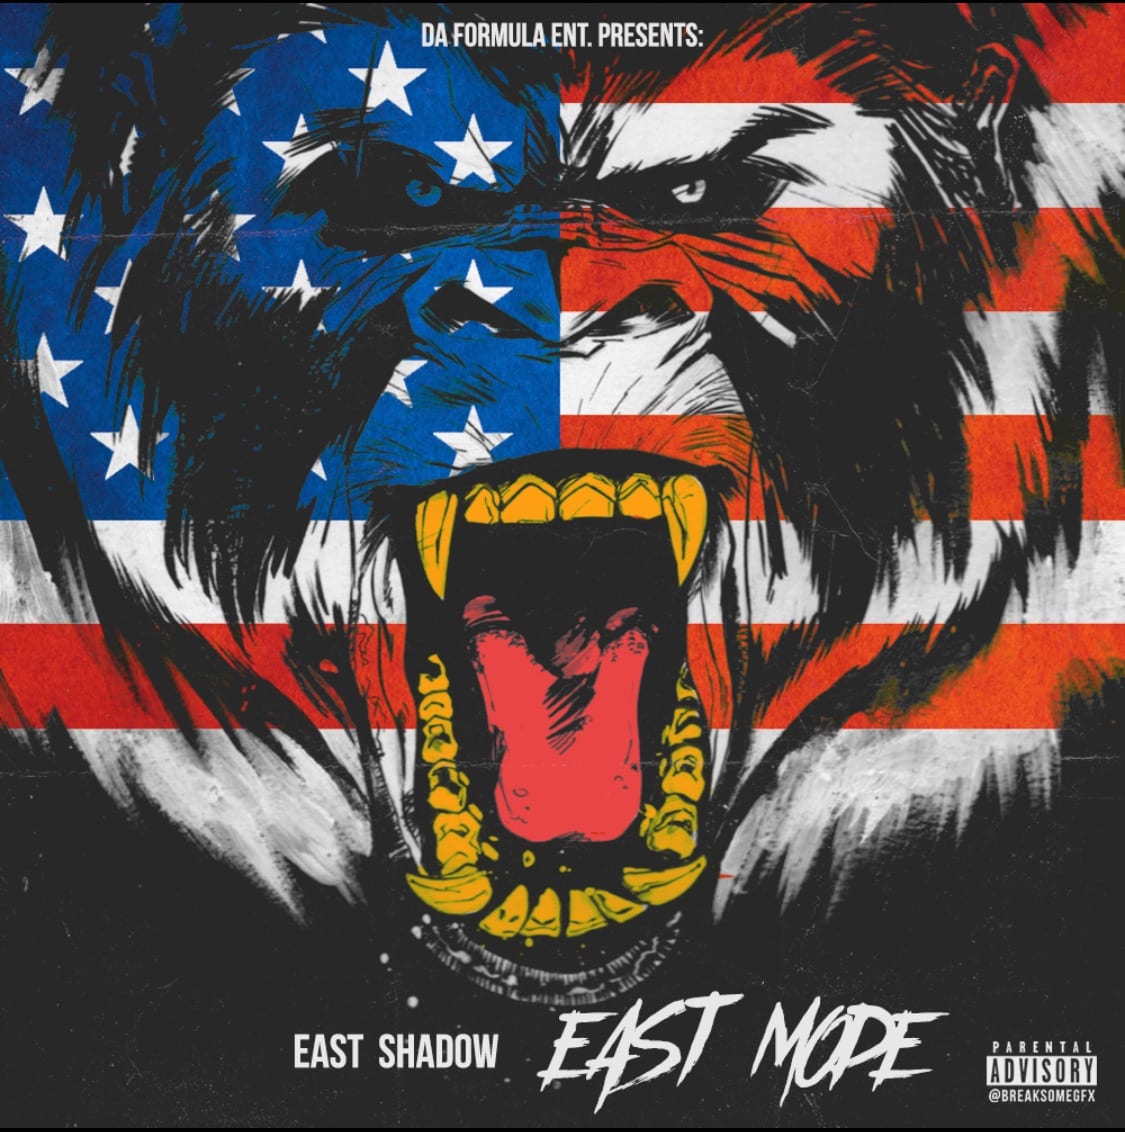 East Shadow Drops His New Album - "East Mode"